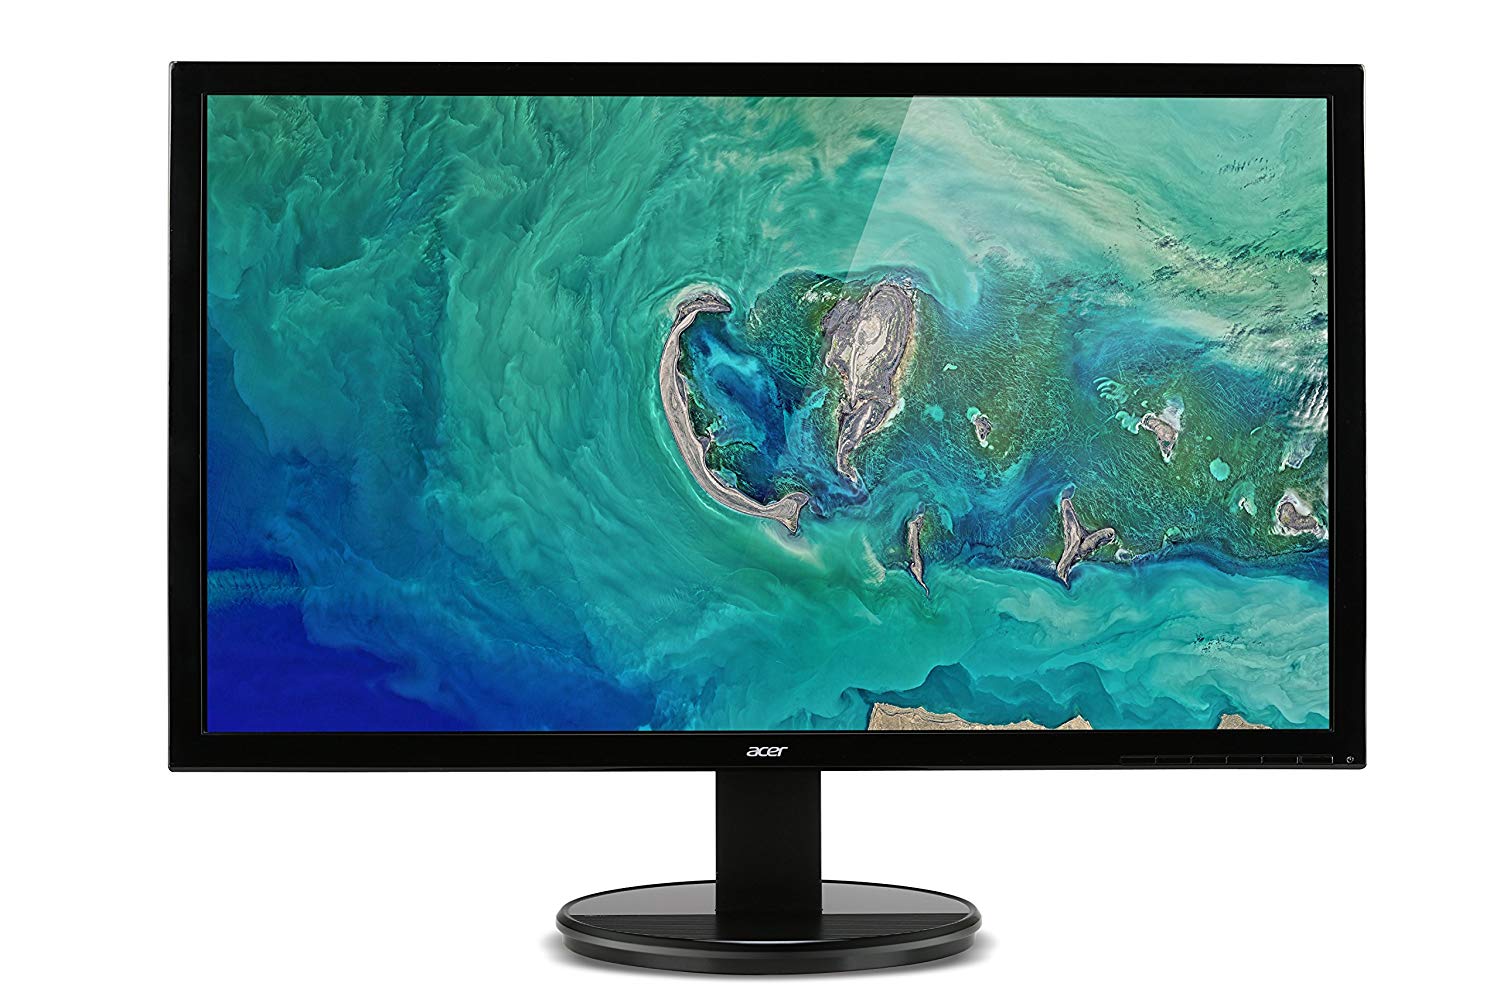 Monitor Acer 19" solo 50€